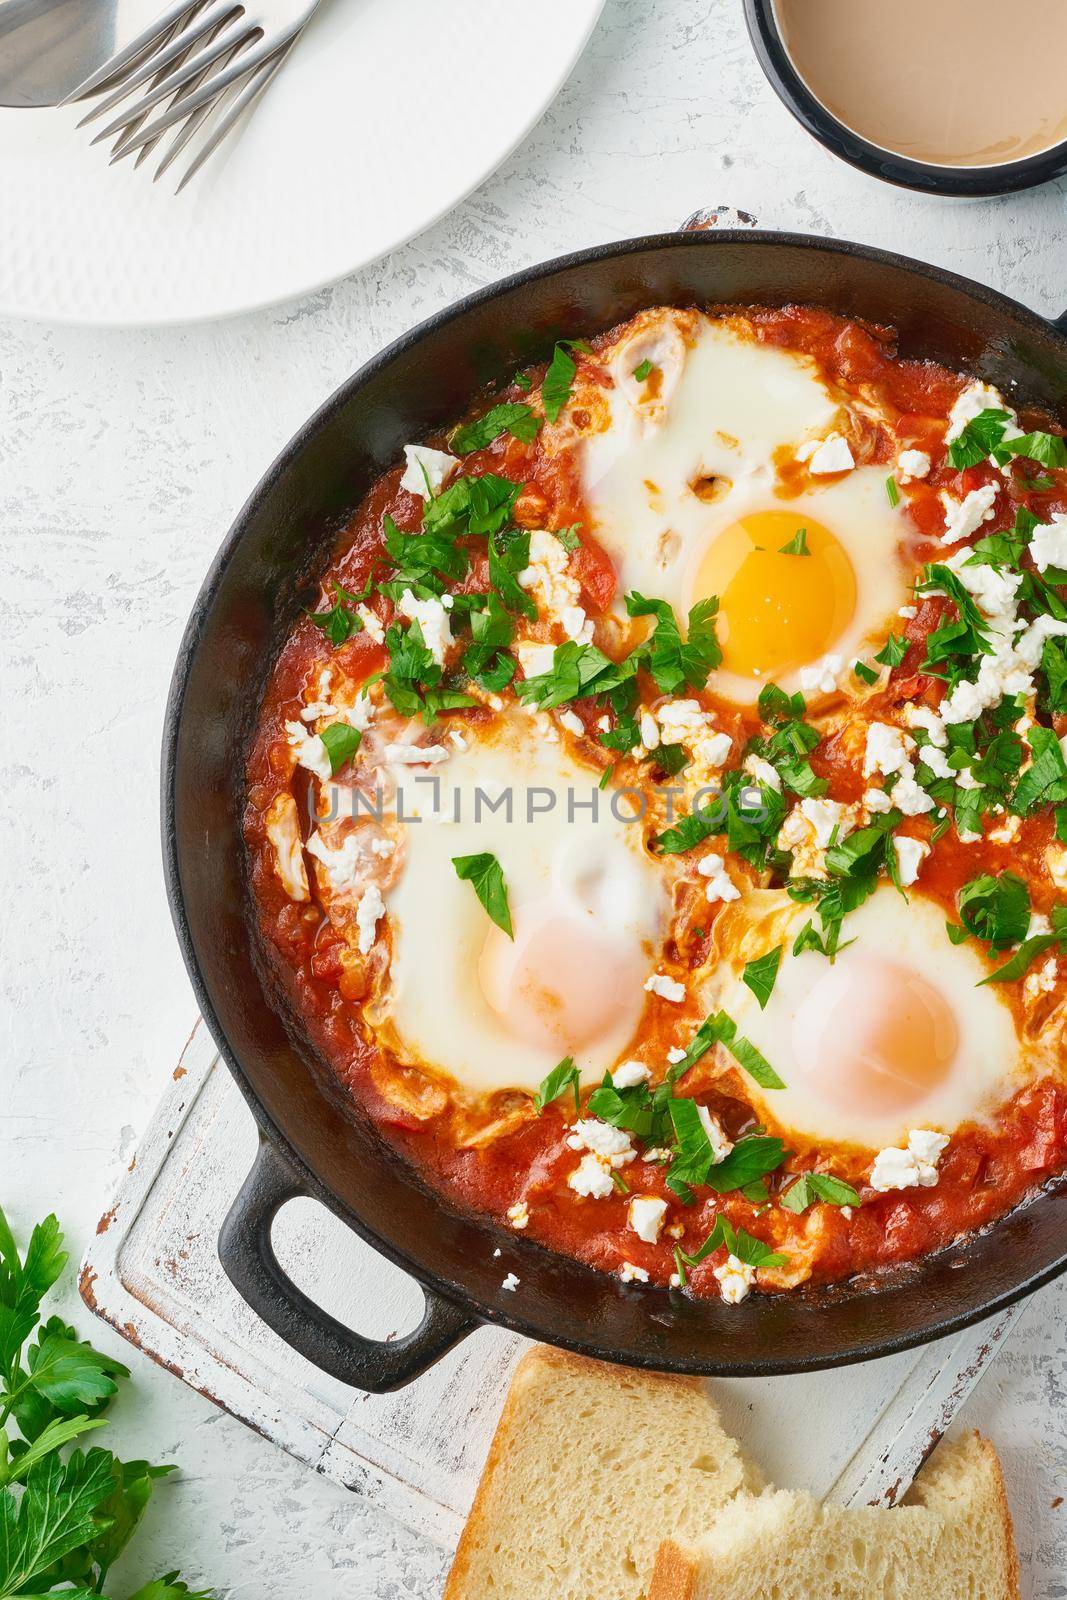 Shakshouka, eggs poached in sauce of tomatoes, olive oil. Mediterranean cousine. by NataBene